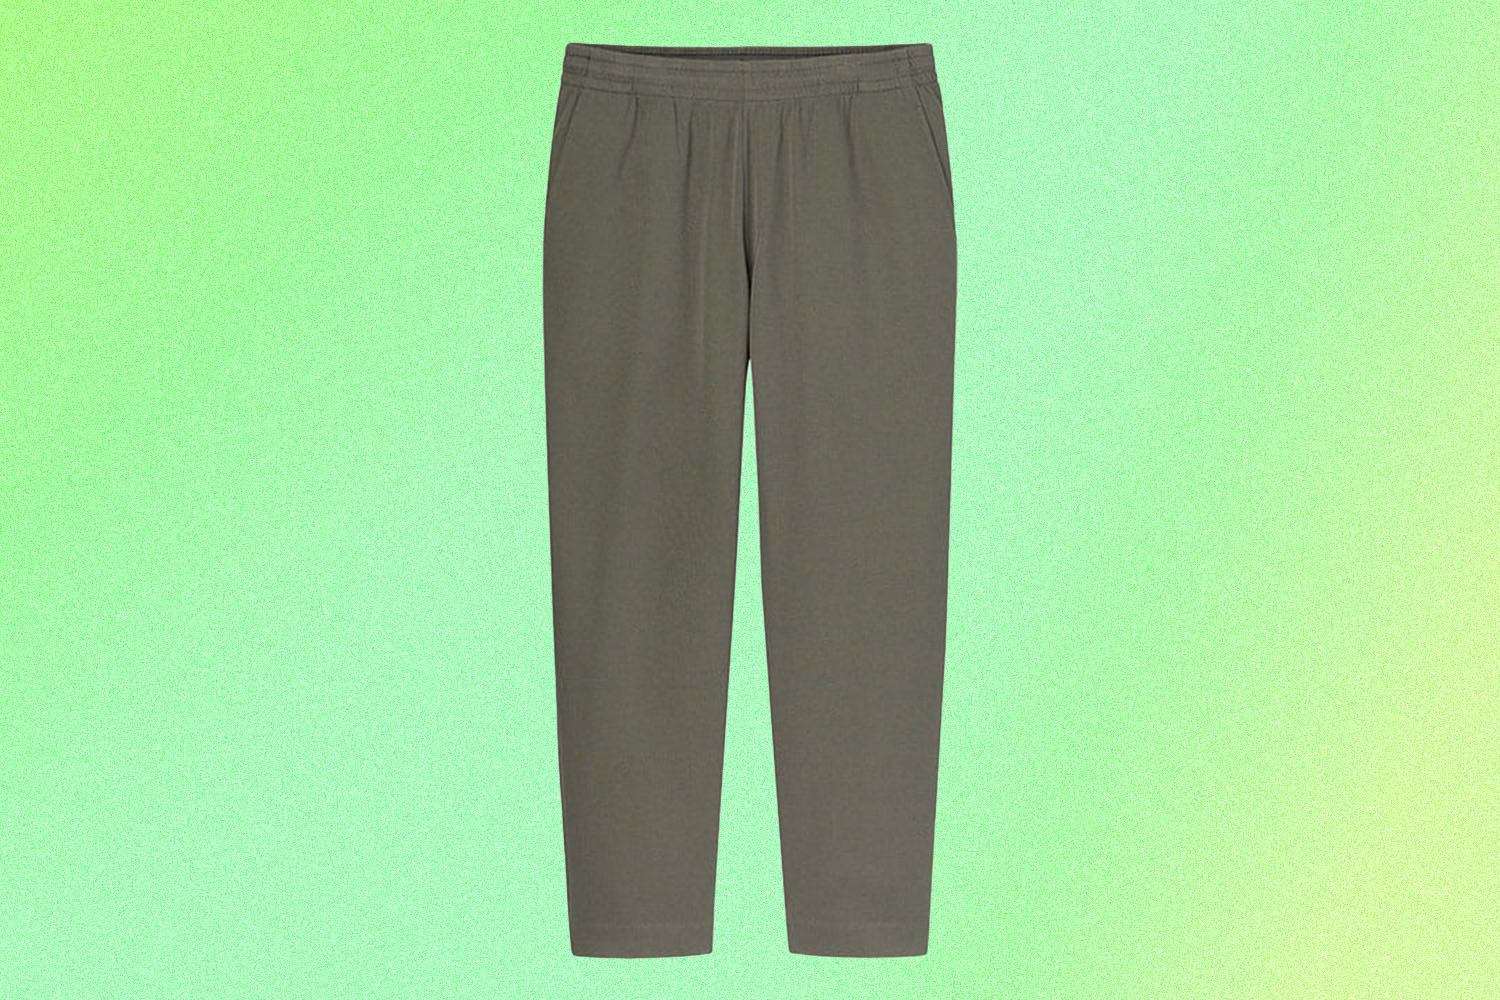 green French knit pants on a green background